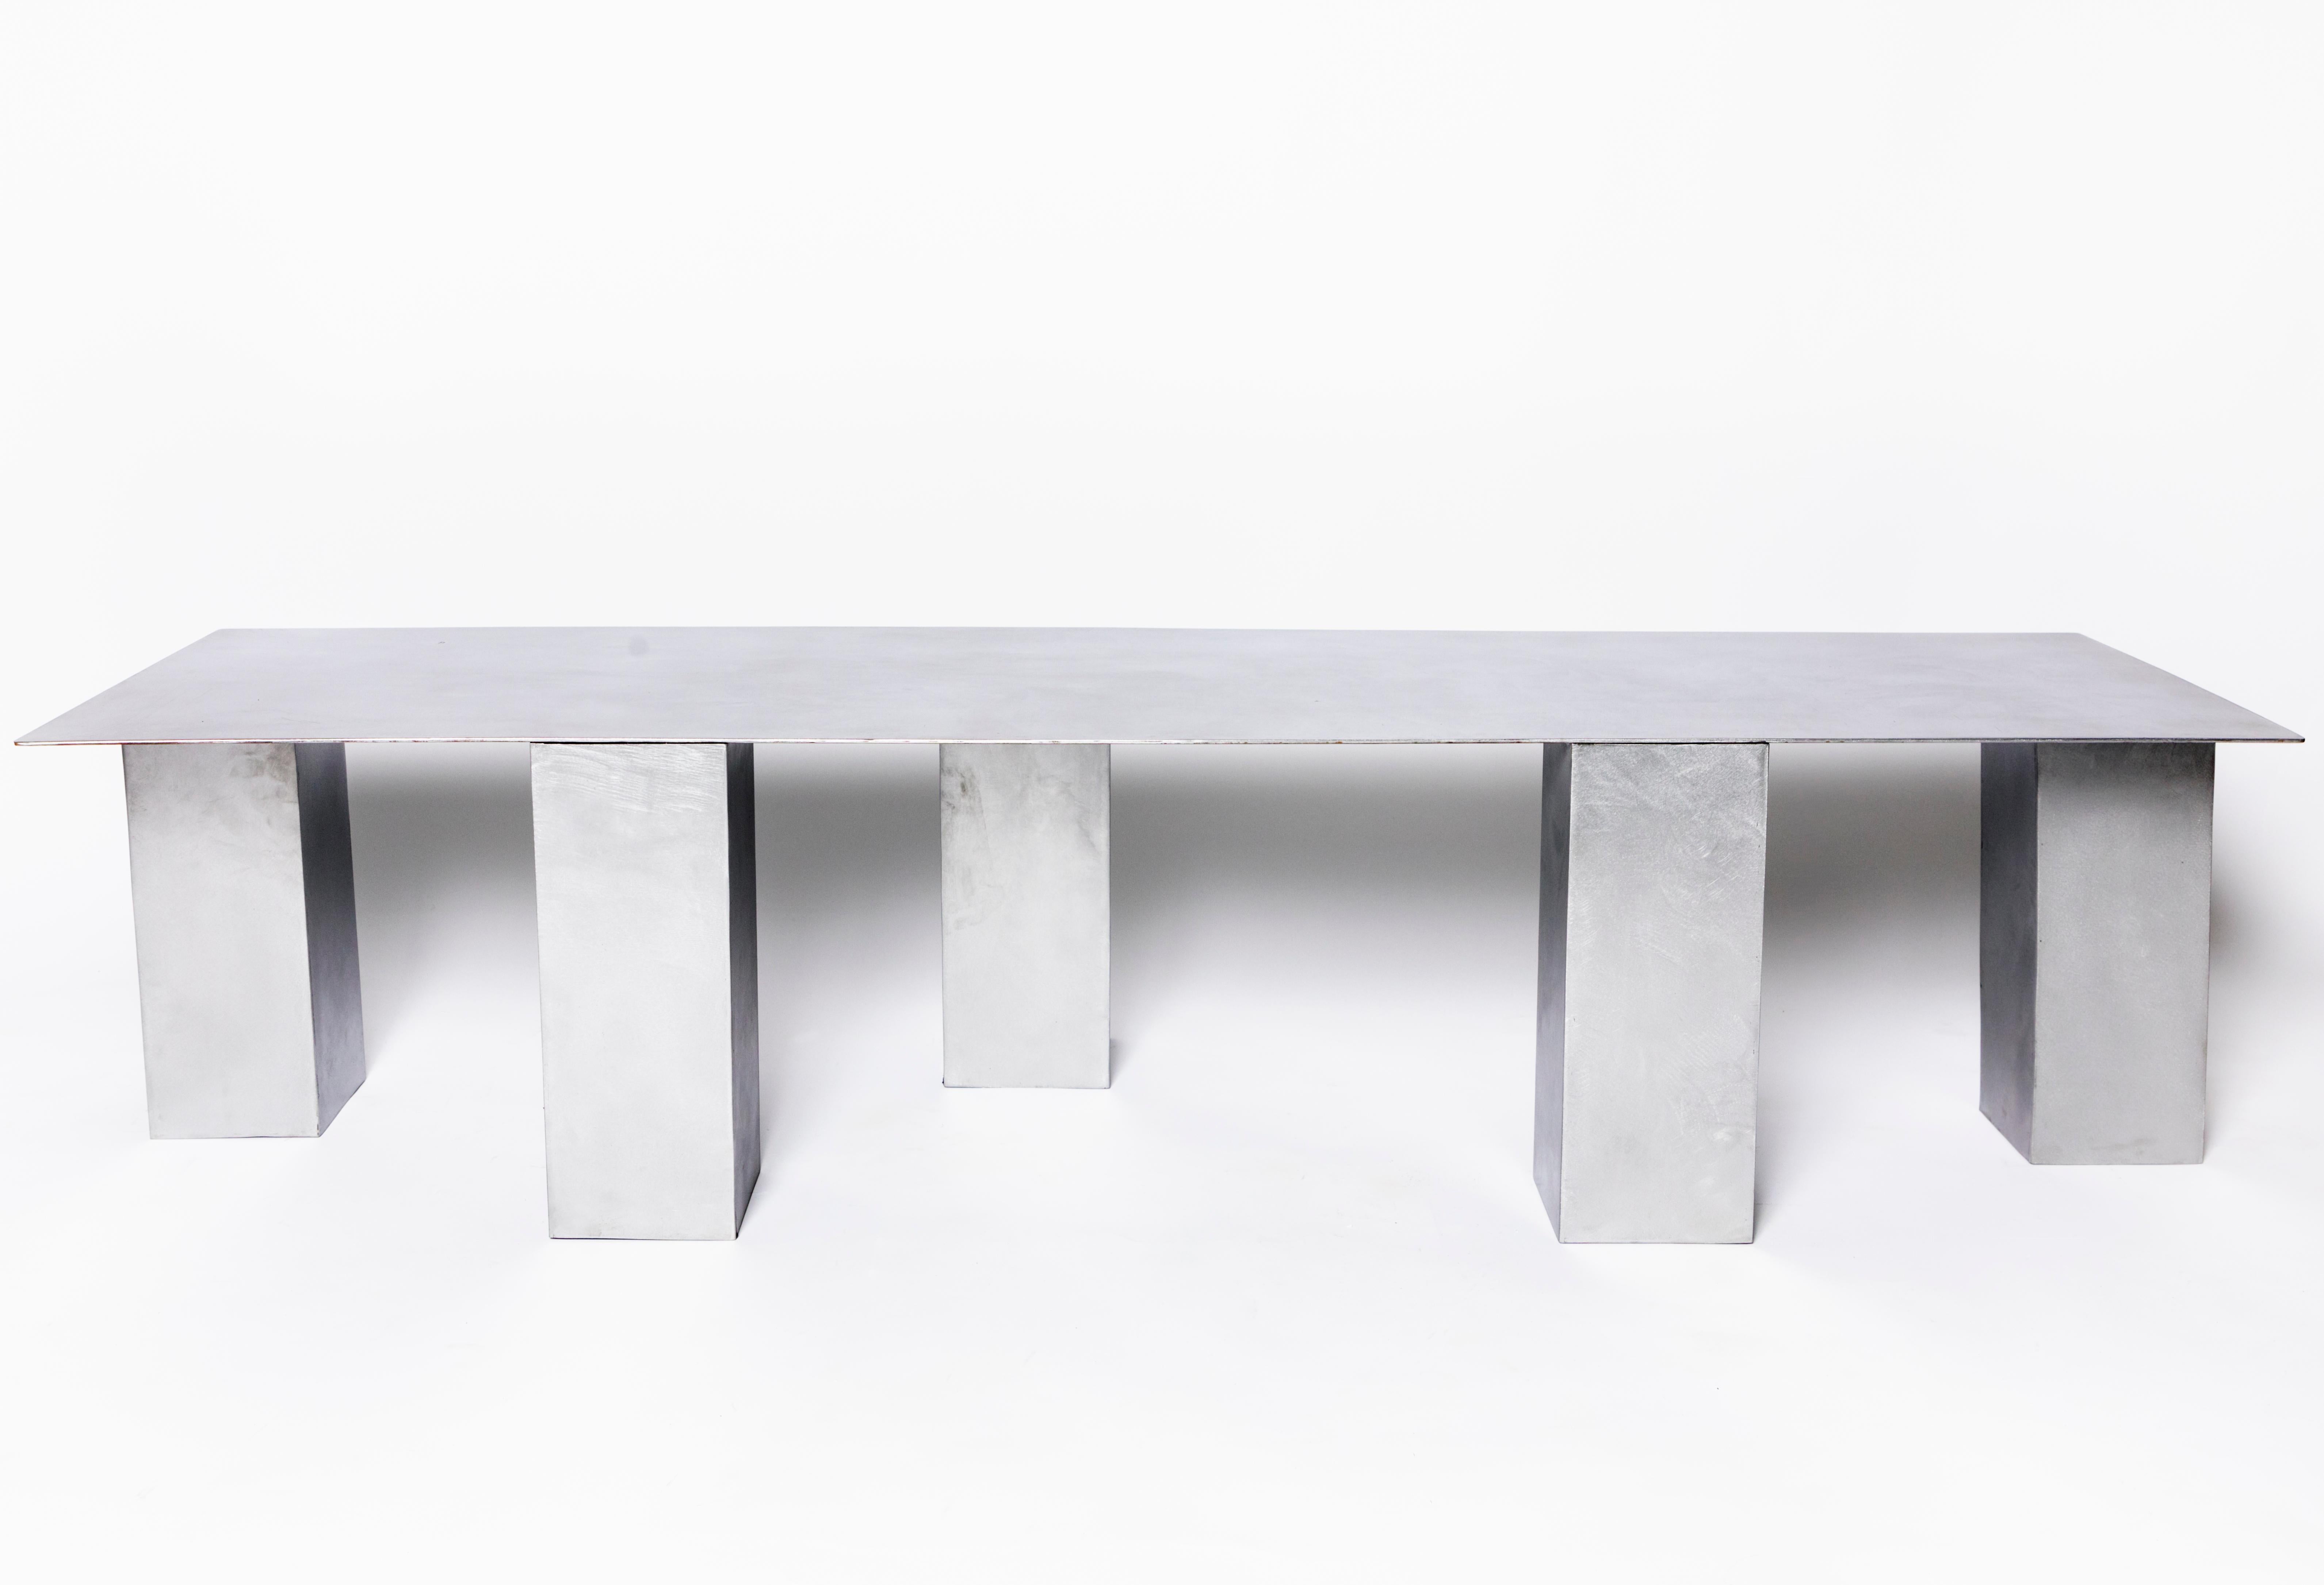 Unmatched coffee table by Pietro Franceschini
Sold exclusively by Galerie Philia
Dimensions: W 170 x L 60 x H 40 cm
Materials: Aluminium


Pietro Franceschini is an architect and designer based in New York and Florence. He was educated in